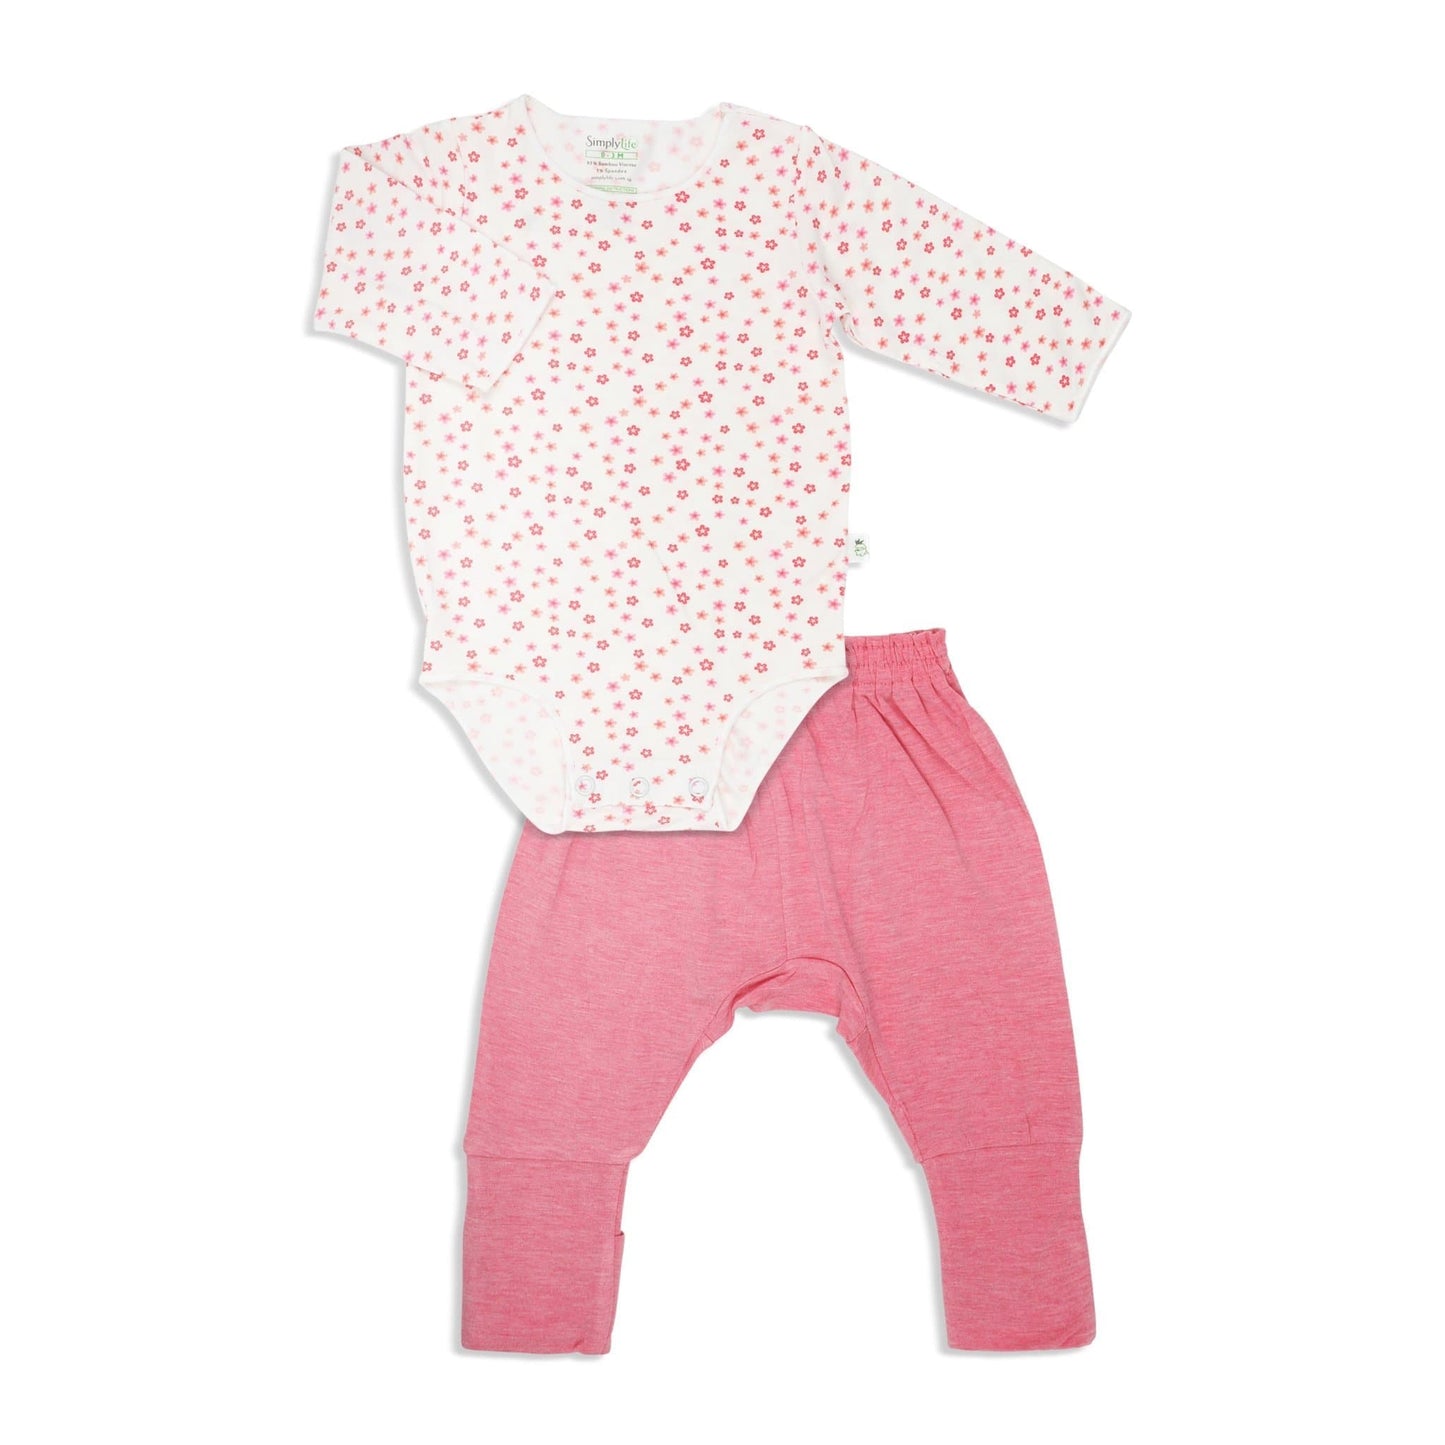 Floral - Long-sleeved Stretchy Romper with Foldable Footie Pants - Simply Life